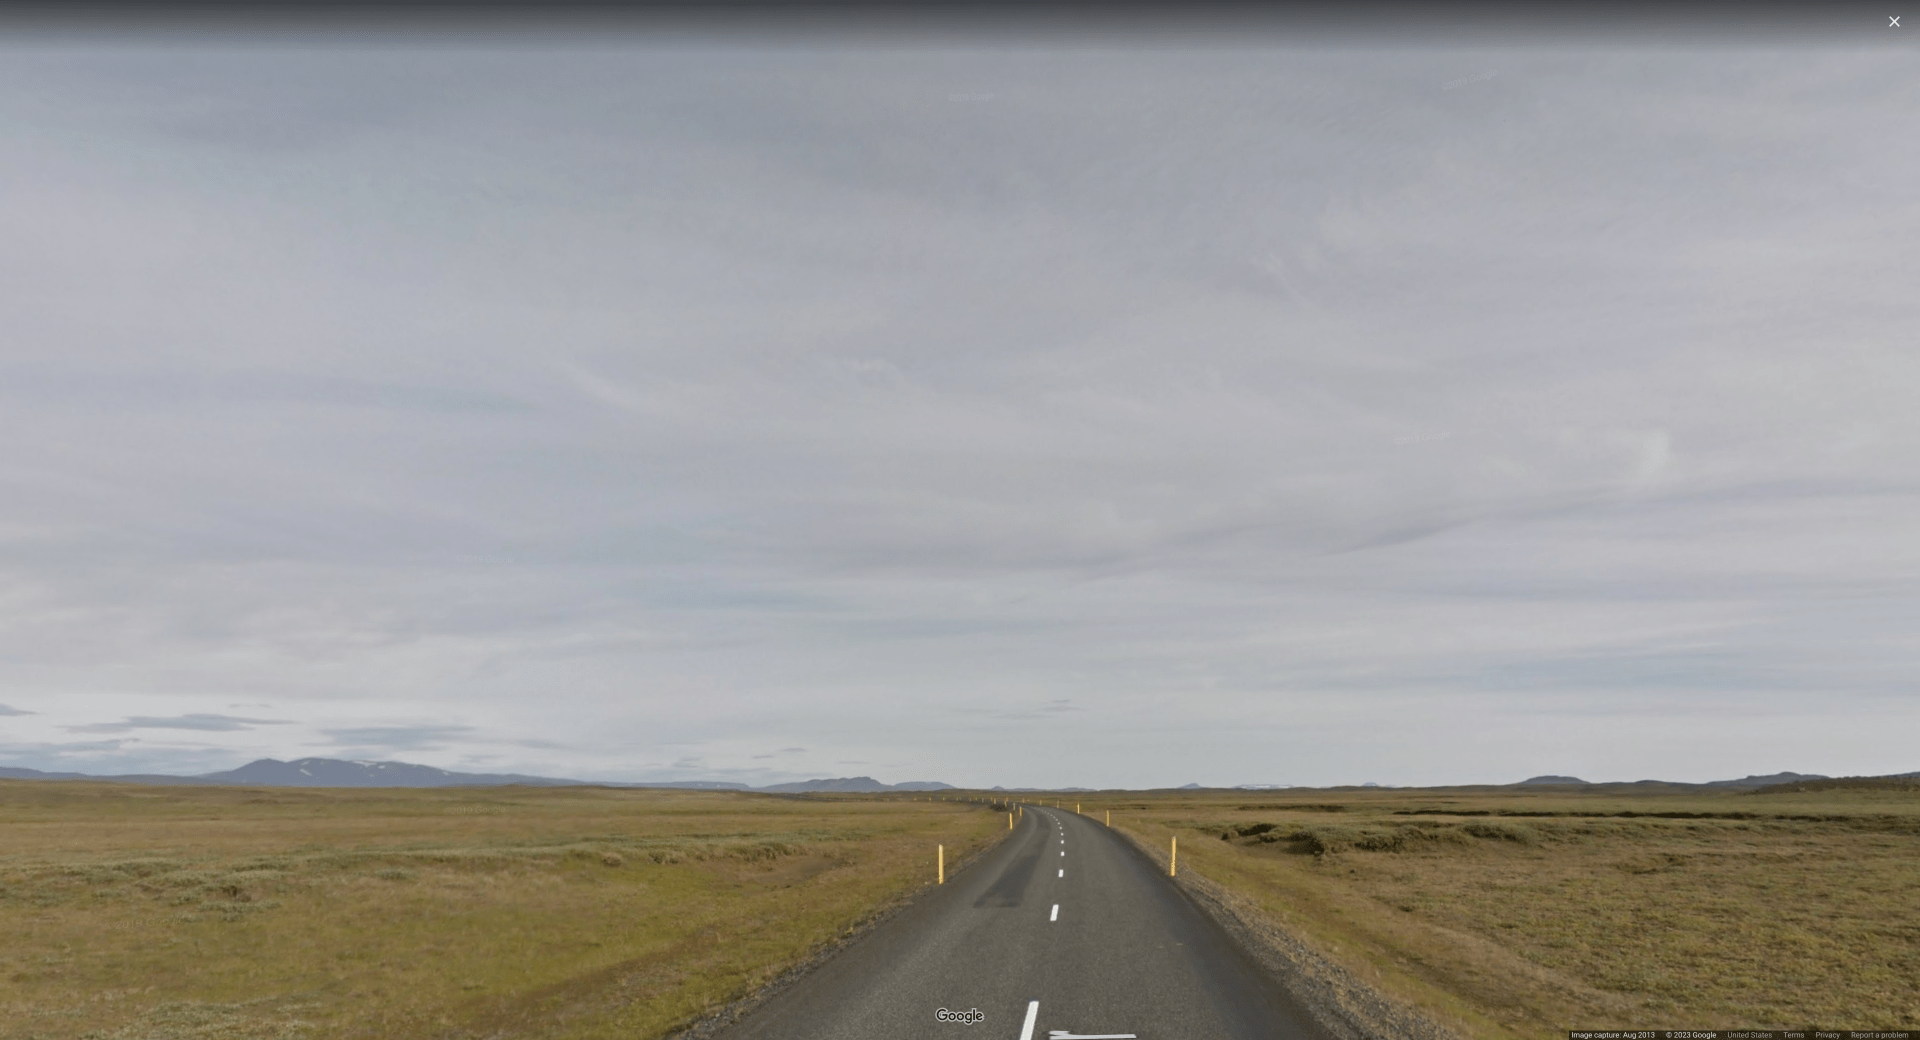 Picture of a road in an extremely flat & empty plains, with overcast skies and yellow reflector poles